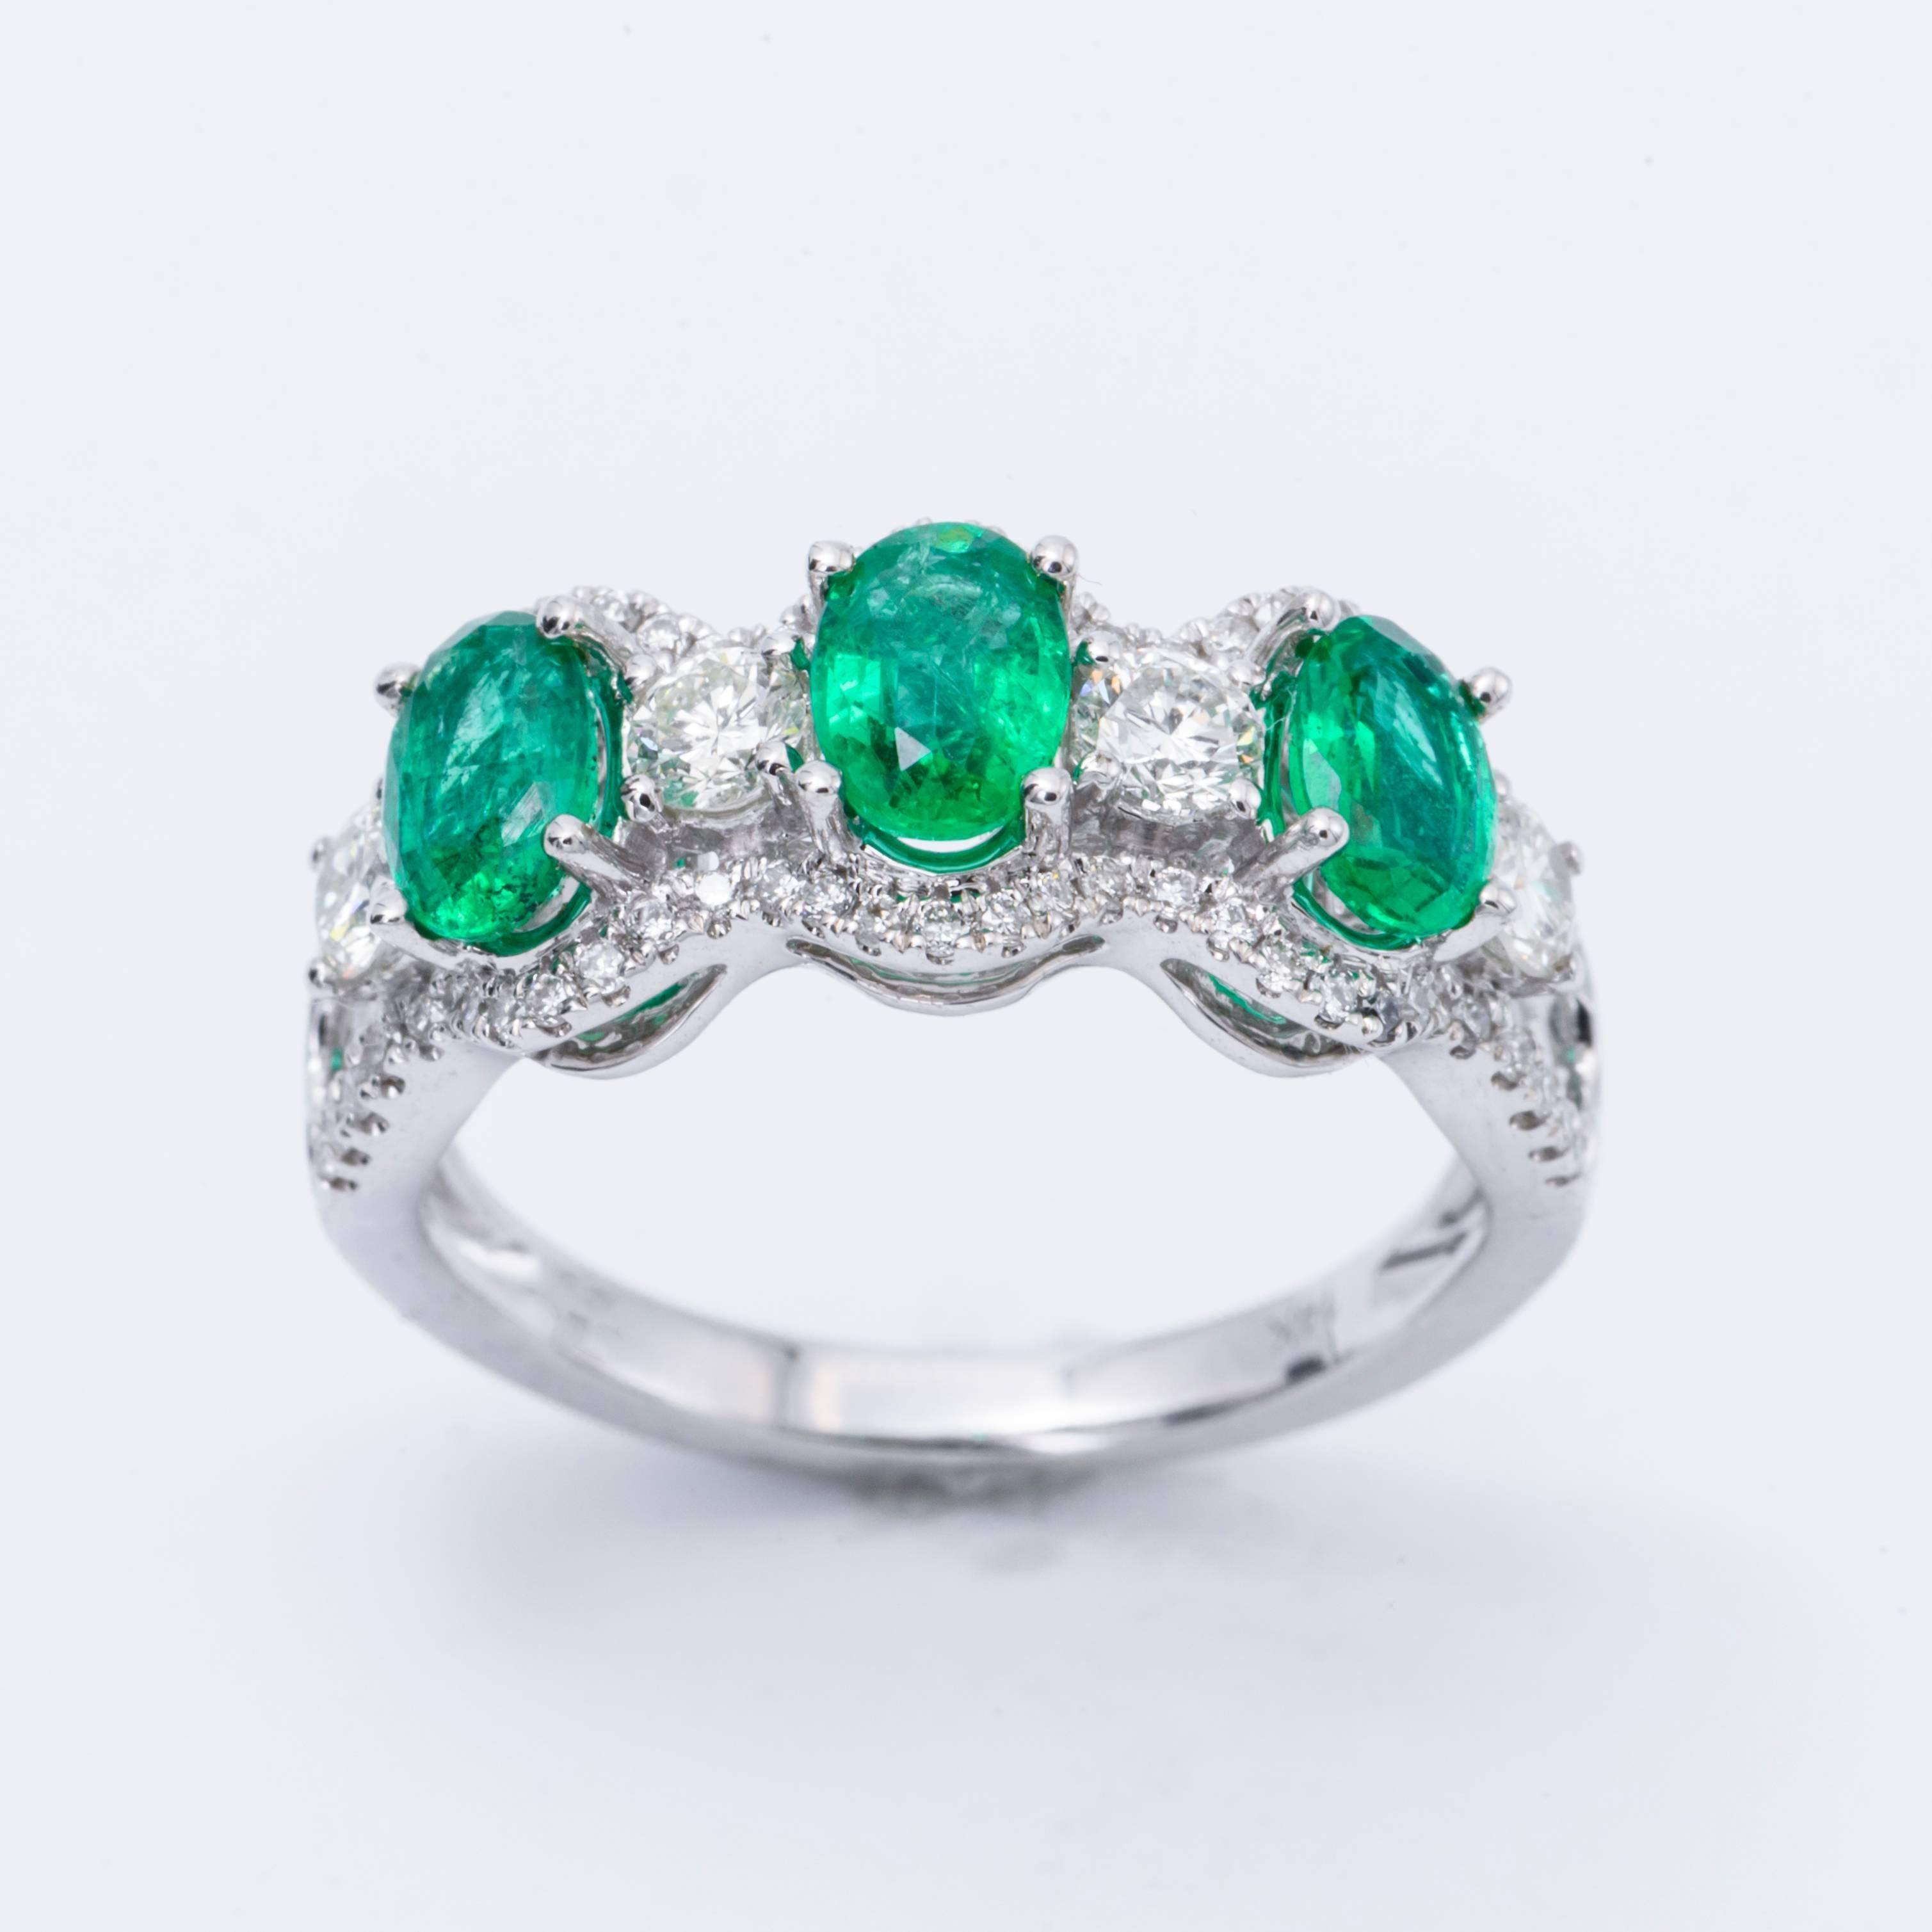 14K white gold ring featuring 3 emeralds stones each one measuring 6x4 mm for a total carat weight of 1.15 cts.
The Diamonds total weight is 0.76 cts.
All our Gemstones are genuine, and are sourced with the highest degree of integrity.